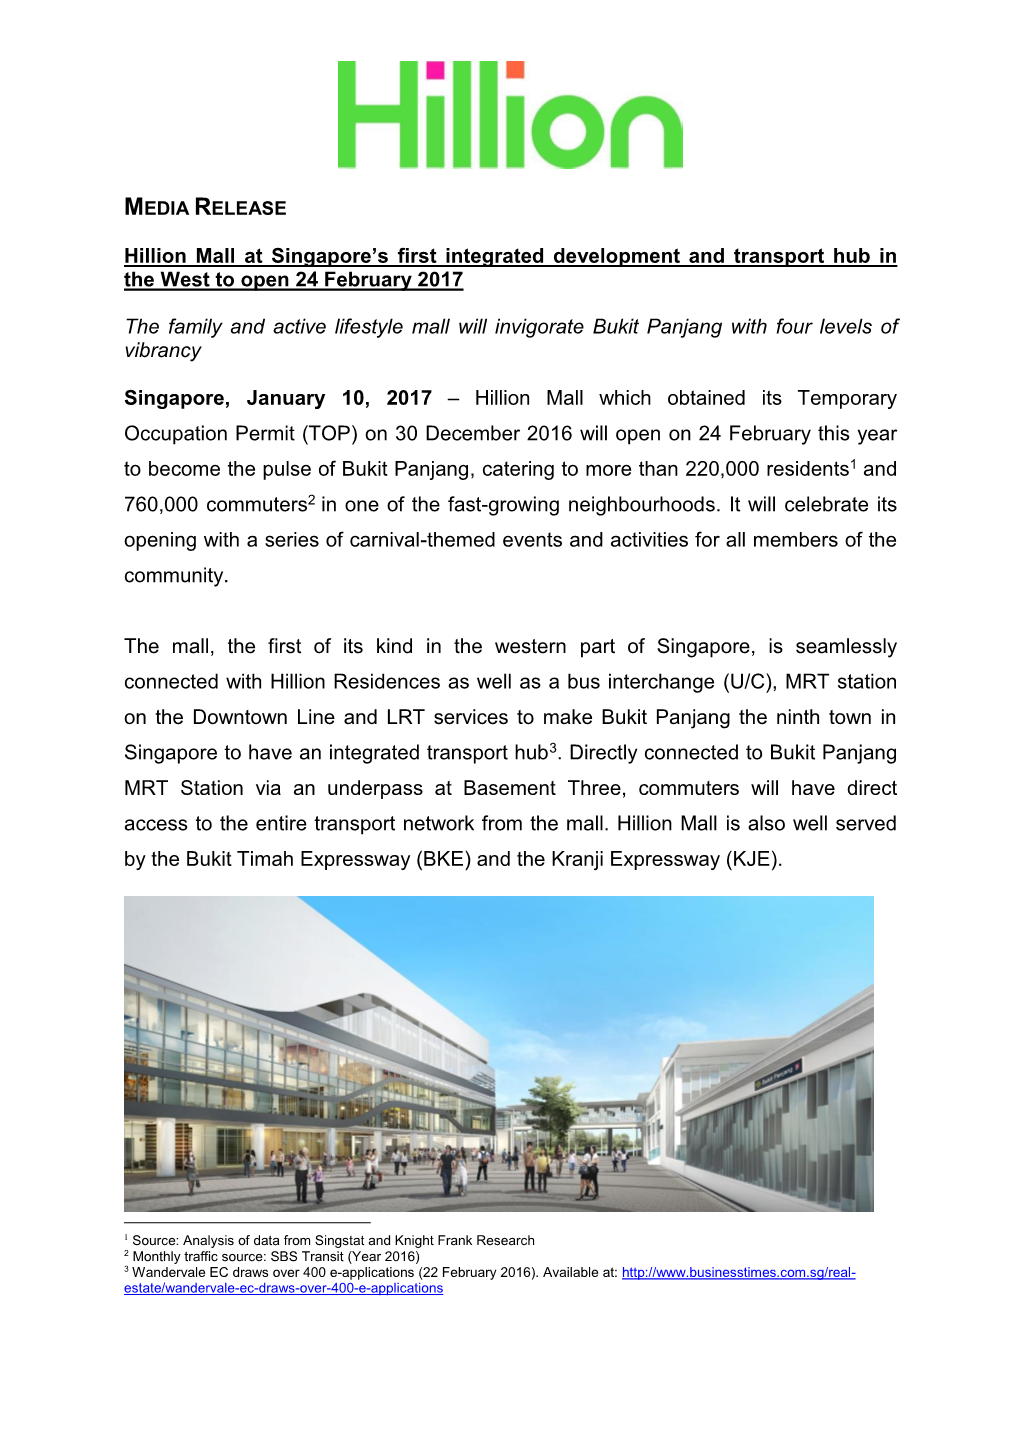 10 January 2017 Hillion Mall at Singapore's First Integrated Development and Transport Hub in the West